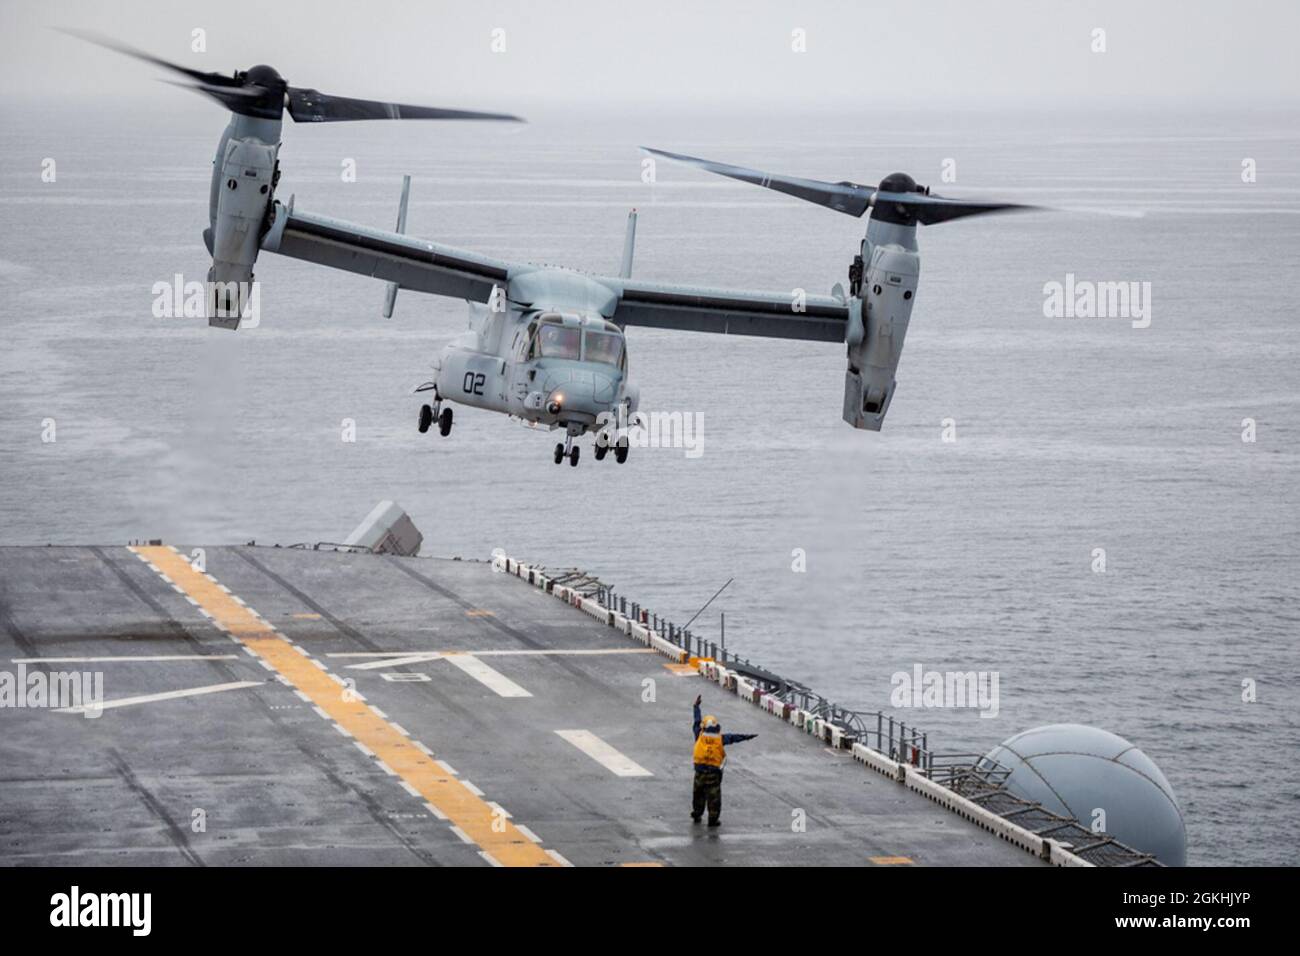 210424-N-MZ836-3169 ATLANTIC OCEAN (April 24, 2021) Aviation Boatswain's Mate (Handling) 3rd Class Ethan Pendergrass directs an MV-22 Osprey assigned to Marine Medium Tiltrotor Squadron 263 during flight operations aboard the Wasp-class amphibious assault ship USS Kearsarge (LHD 3) April 24, 2021. Kearsarge, homeported at Naval Station Norfolk, is underway to certify for operations at sea. Stock Photo